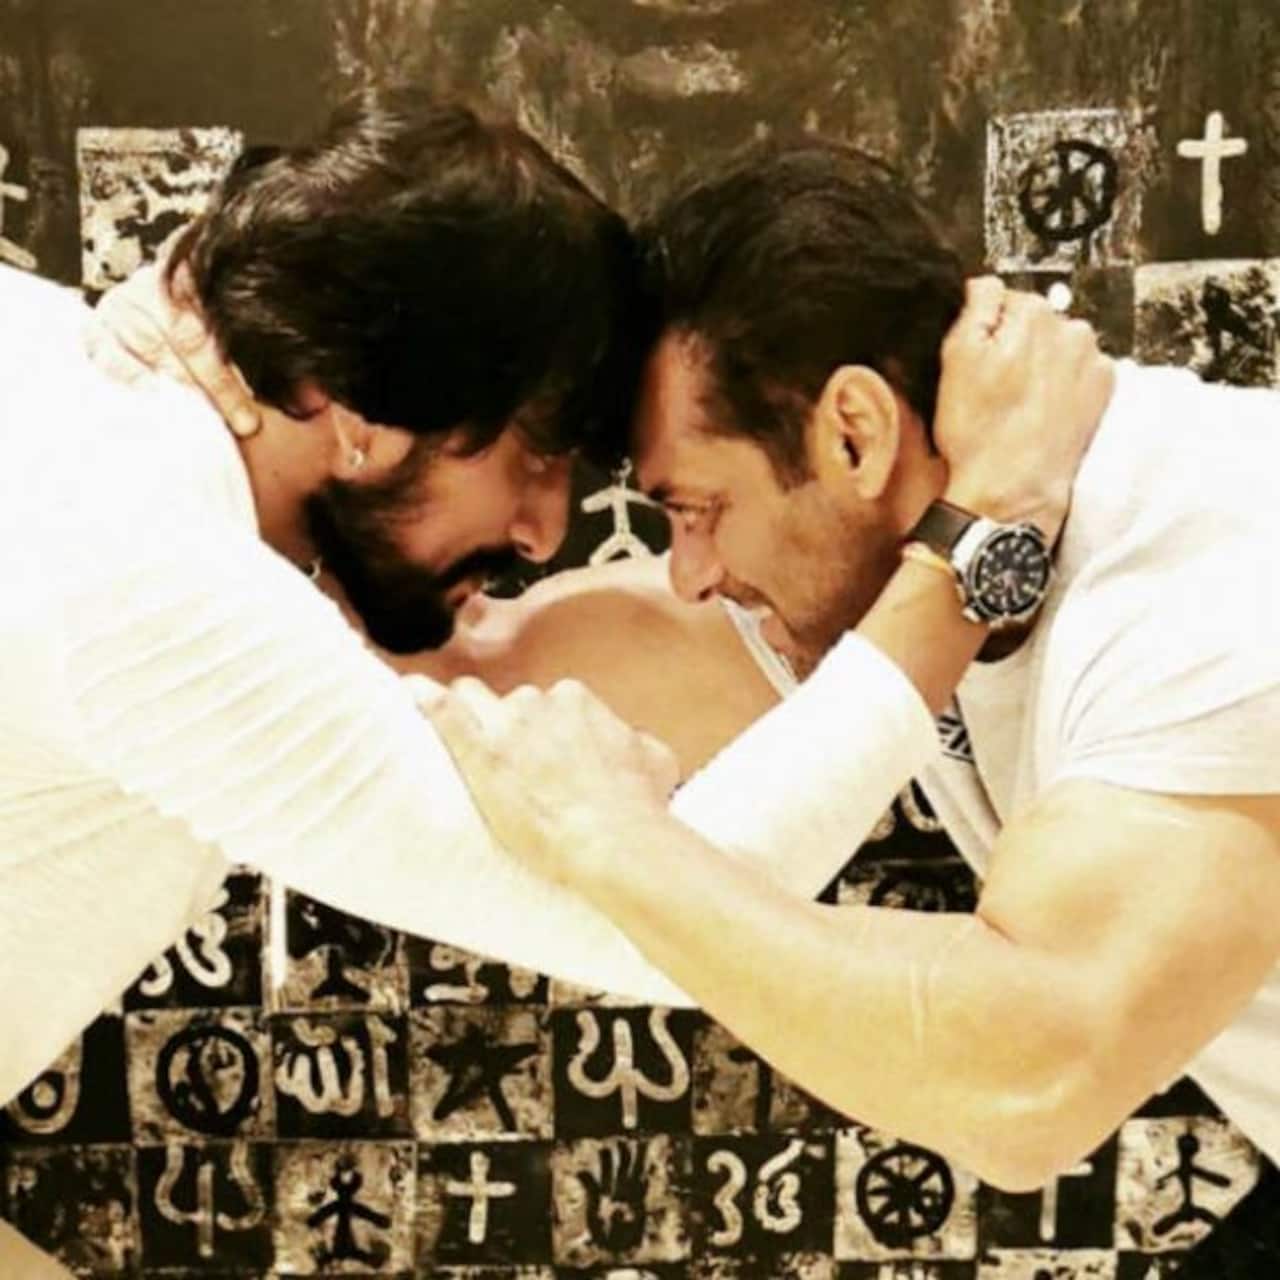 Dabangg 3 Salman Khan And Kichcha Sudeeps Final Fight To Be The The Biggest Action Sequence In